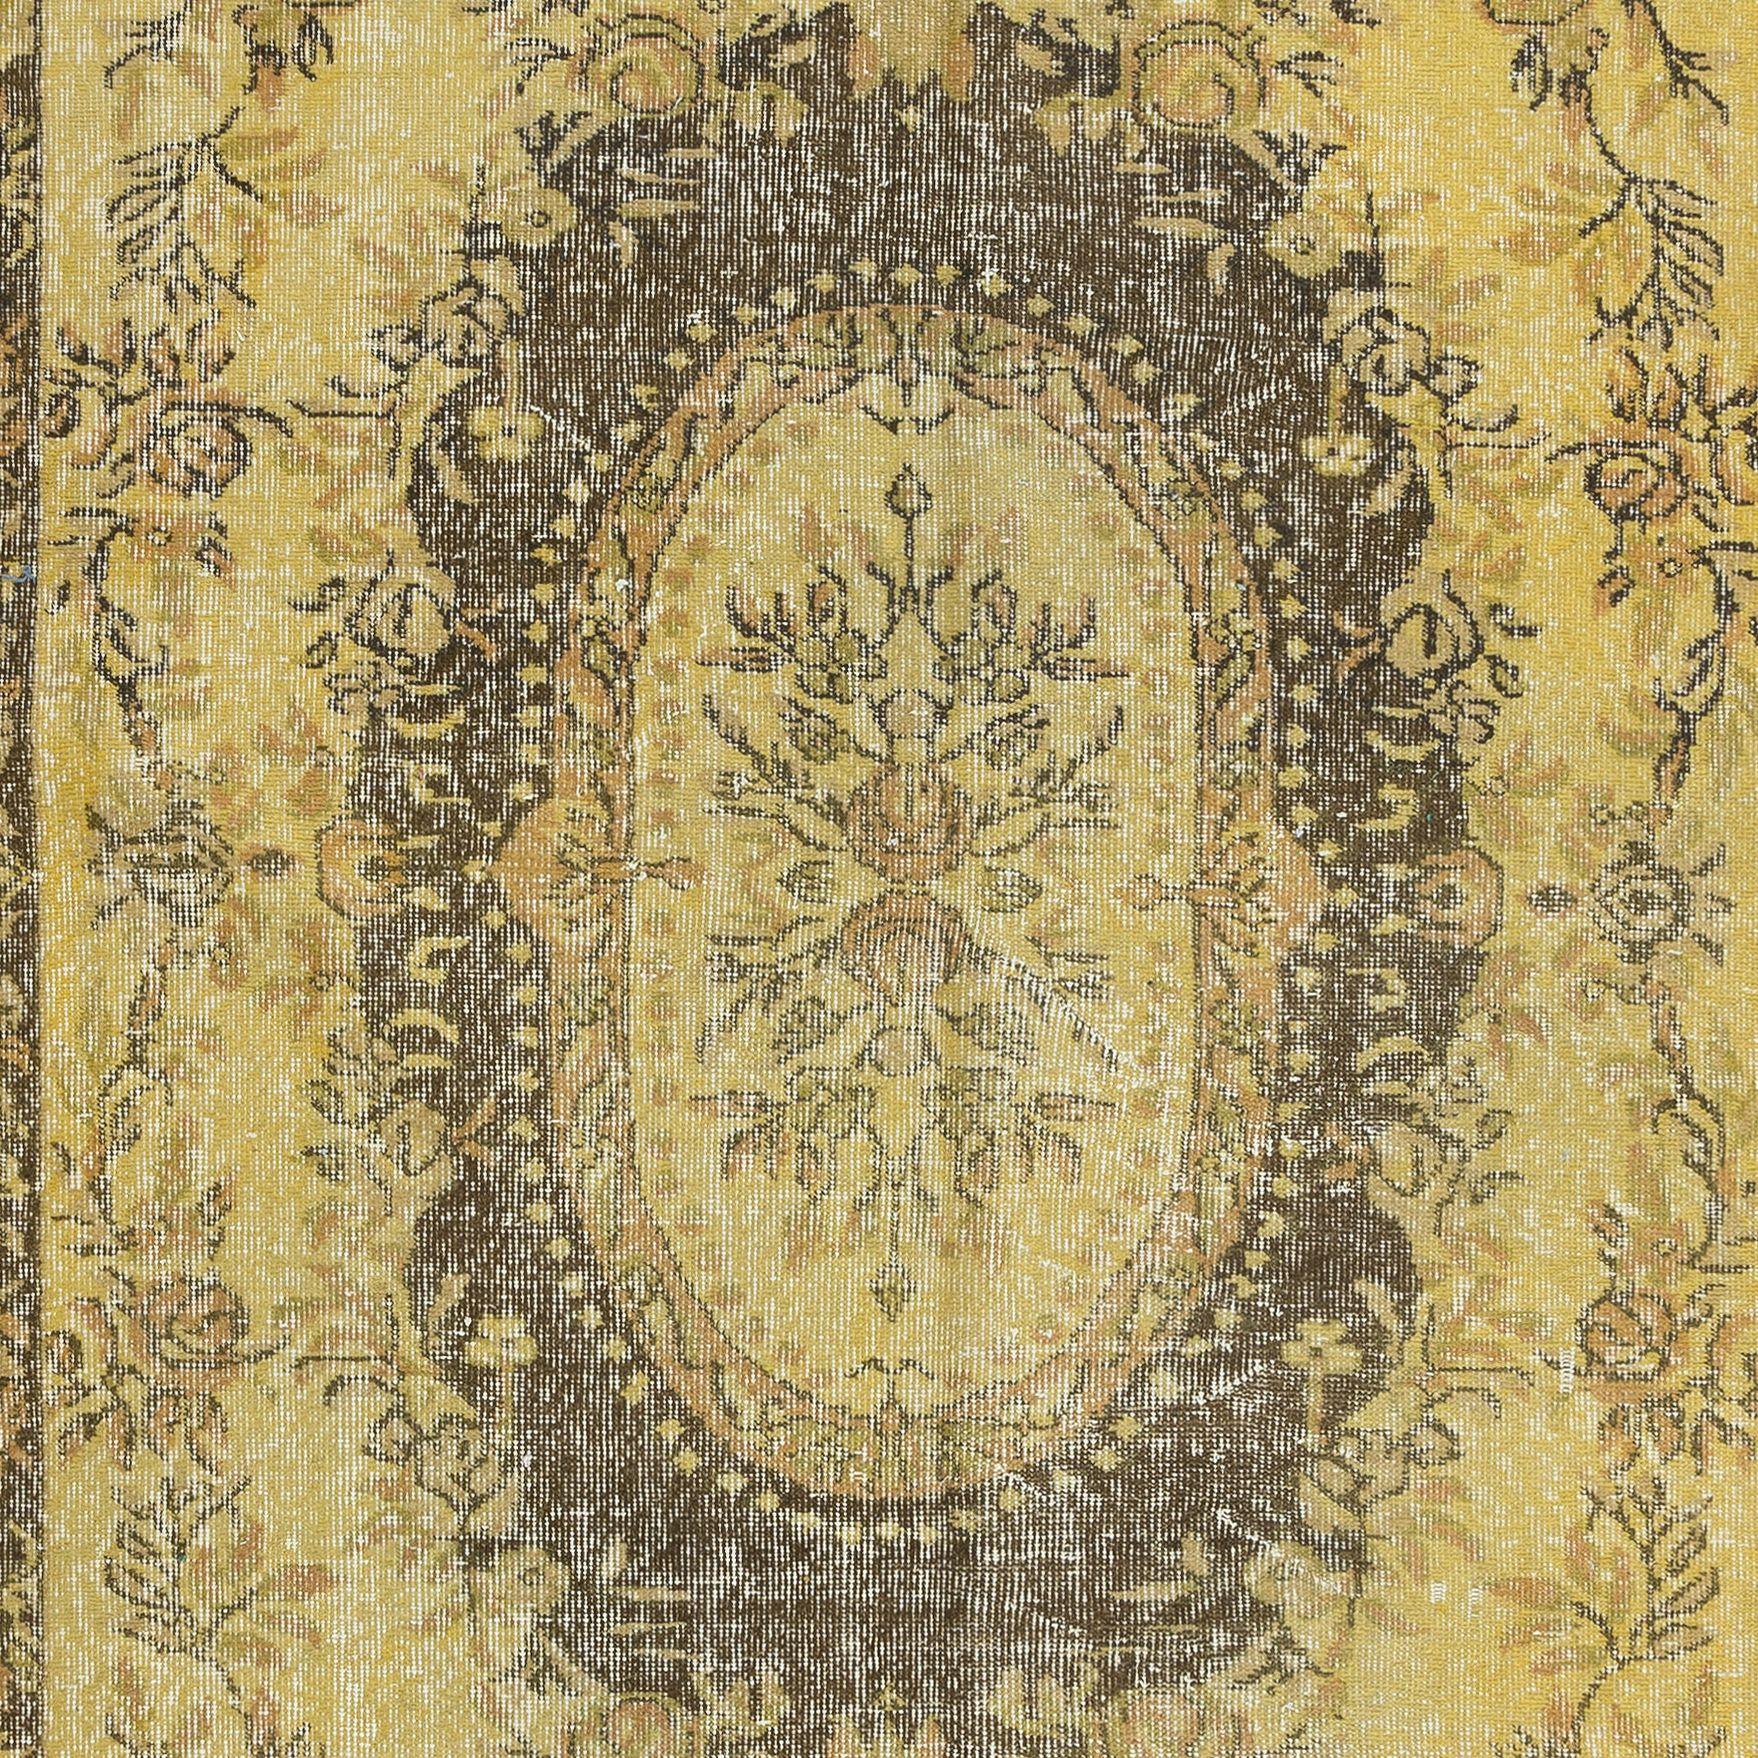 Hand-Knotted 5.8x9.6 Ft Classic Aubusson Inspired Handmade Turkish Rug in Soft Yellow & Brown For Sale